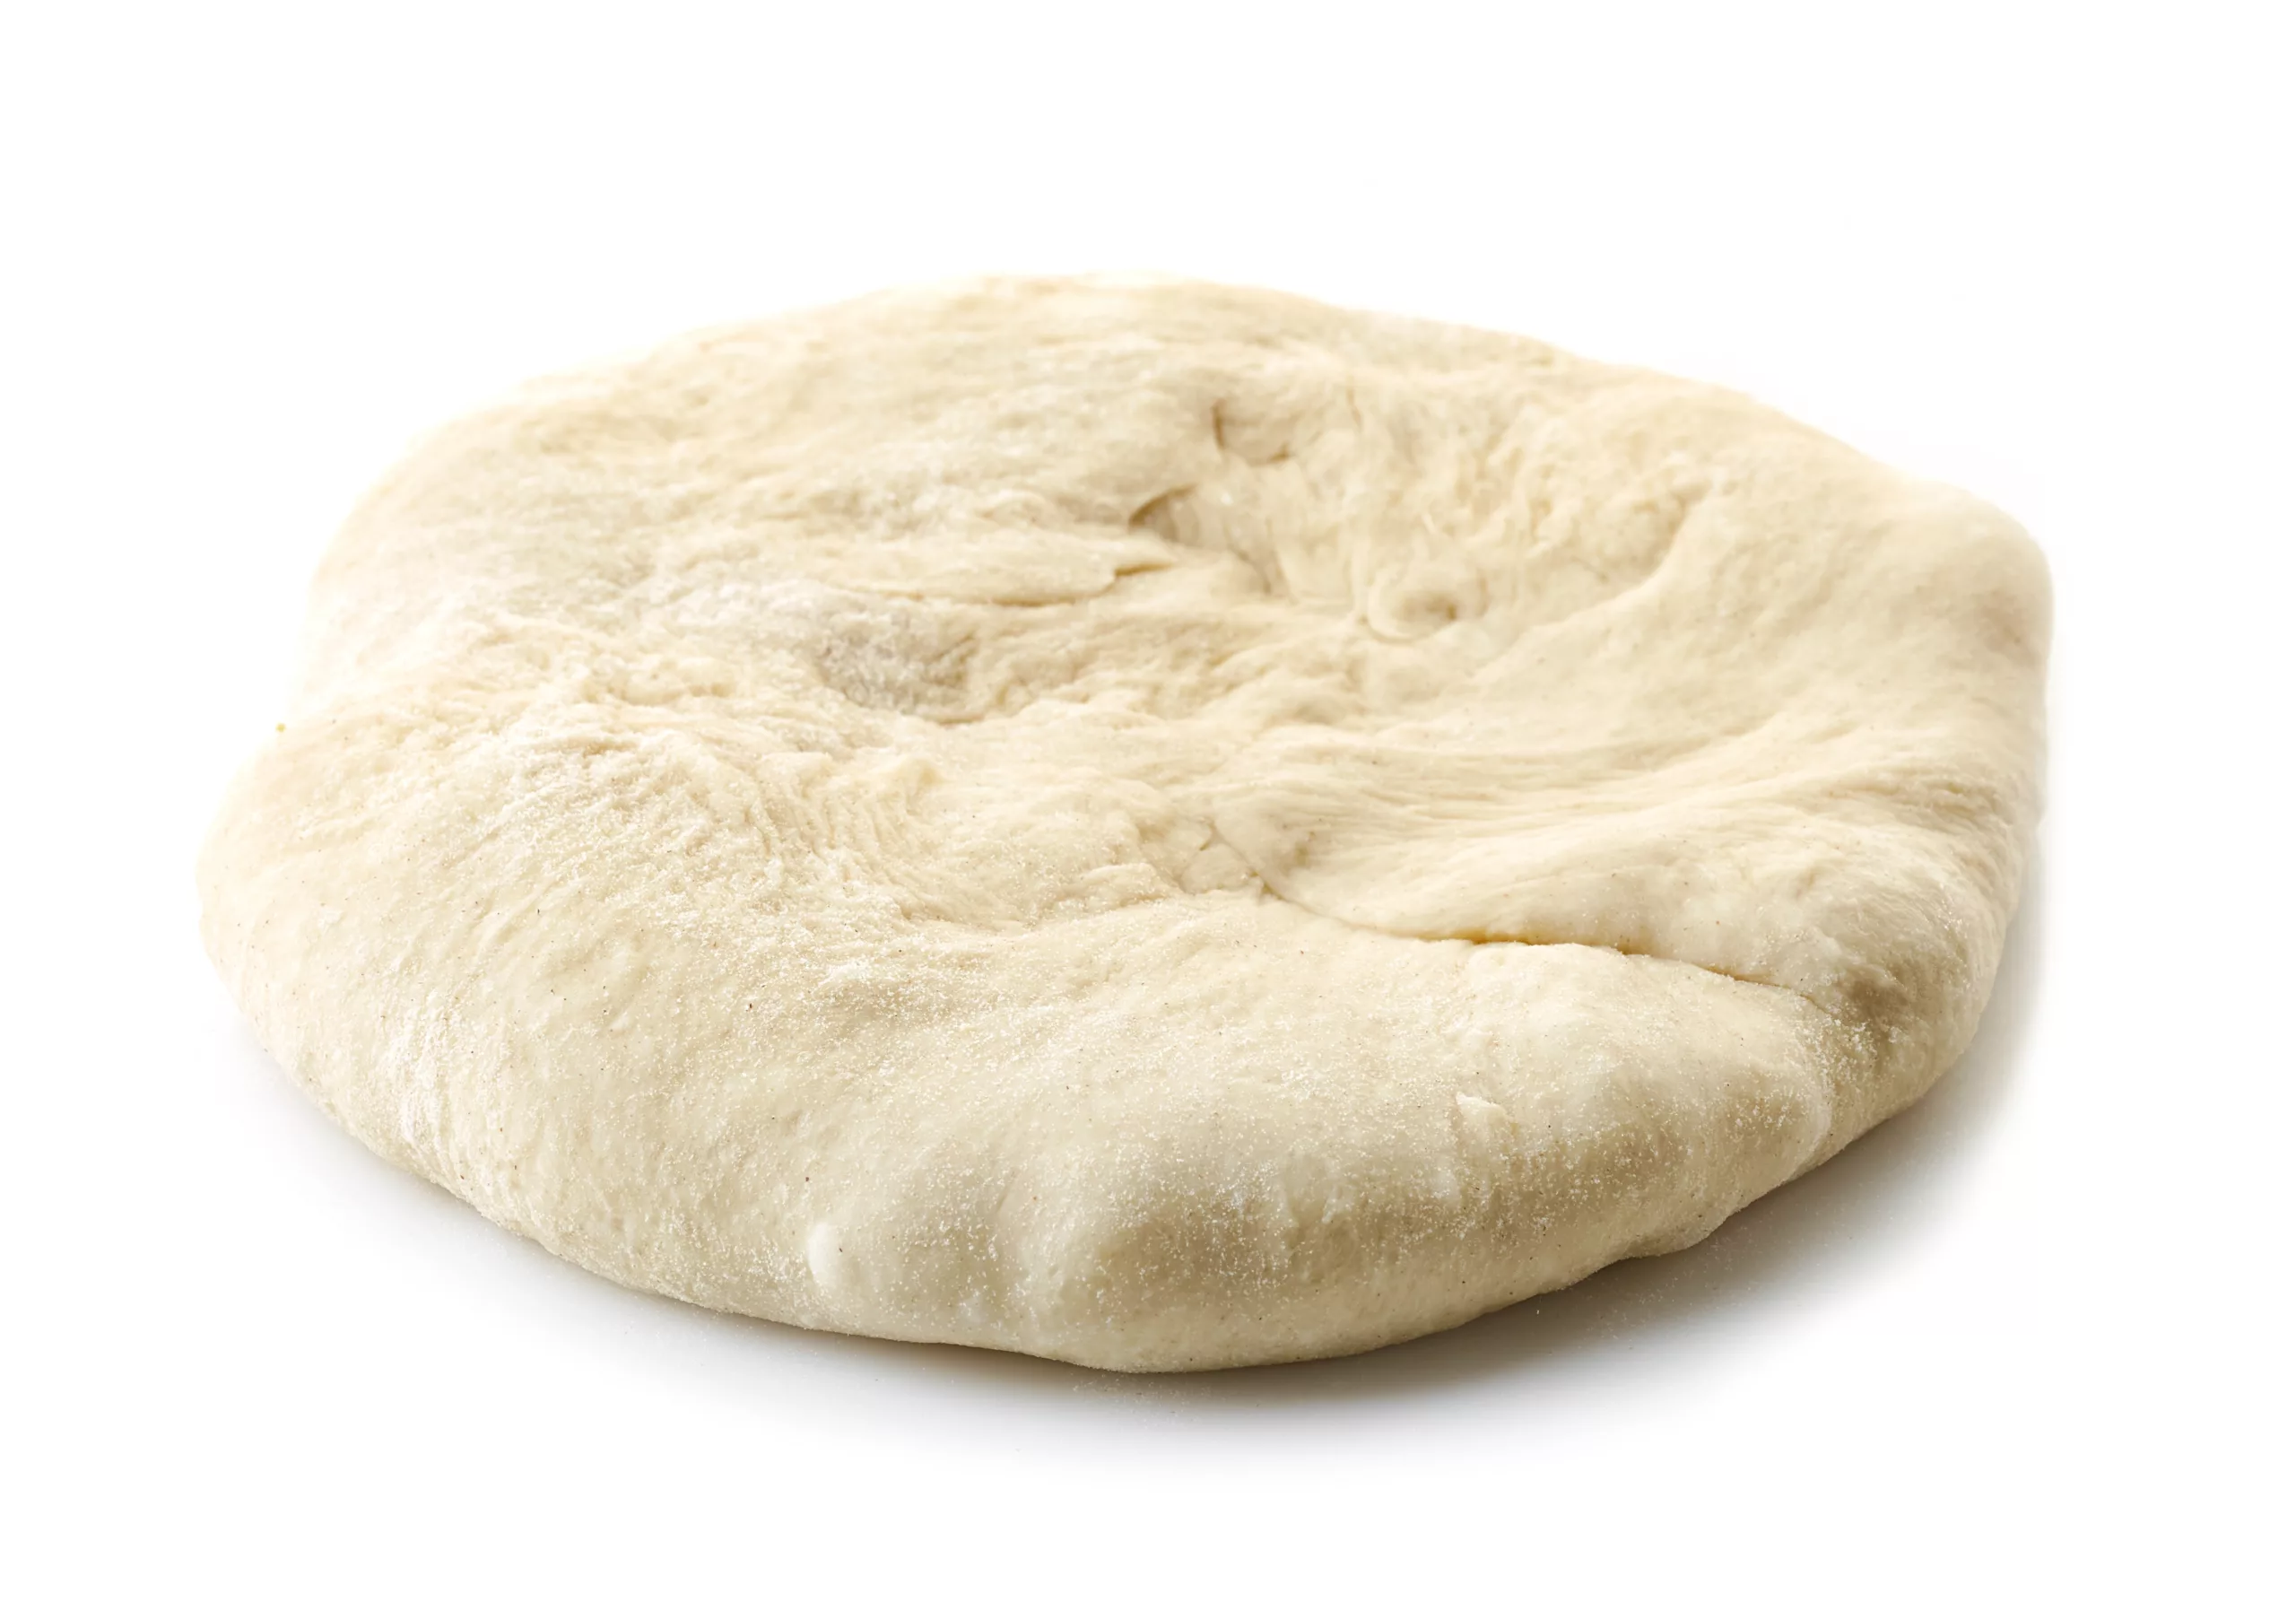 can dogs eat raw yeast dough